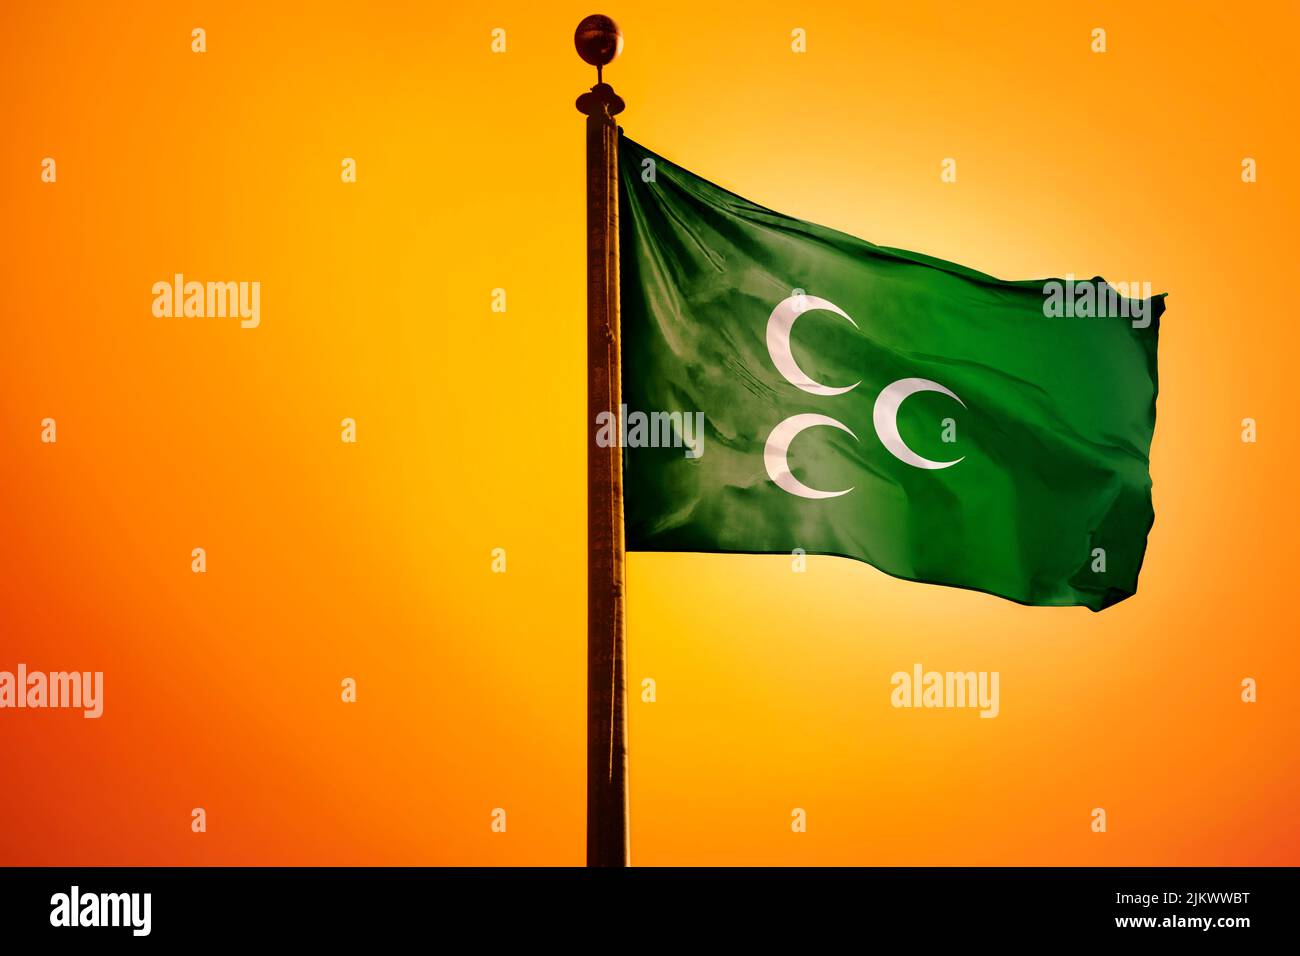 A digital illustration of the Rumelian flag of the Ottoman Empire waving against a bright yellow sky Stock Photo